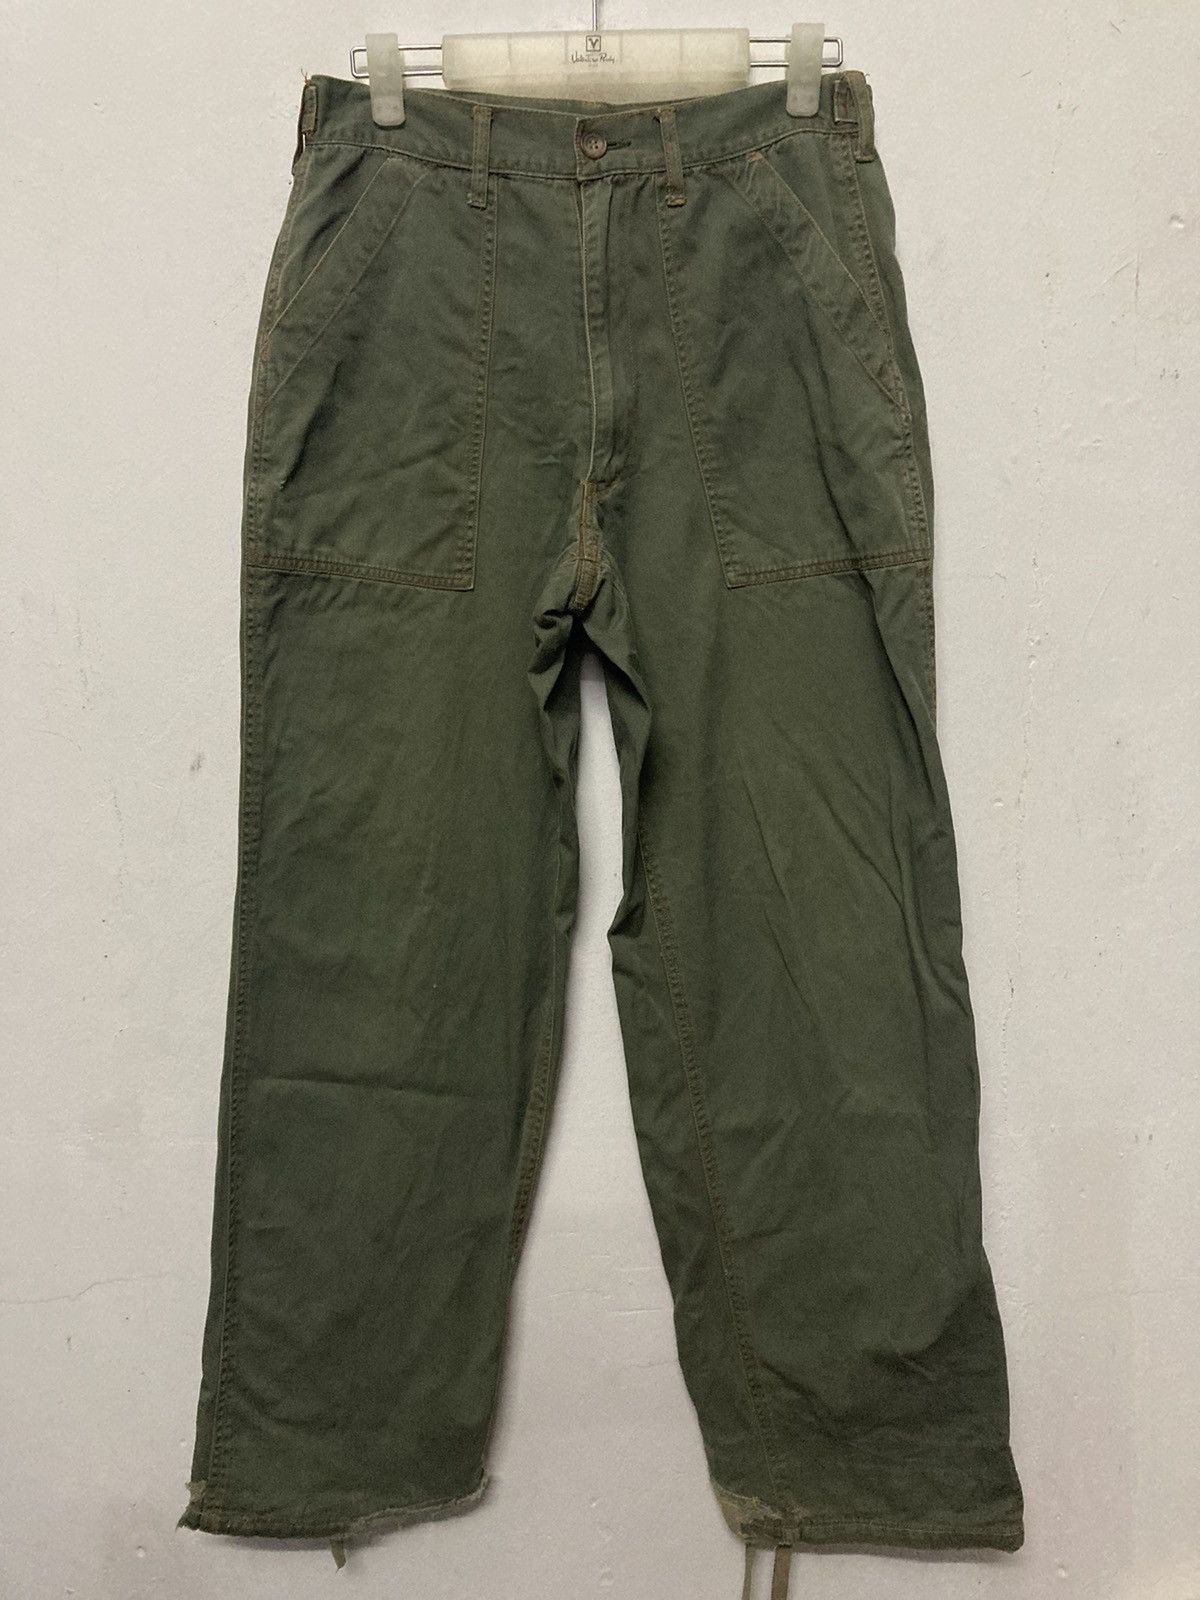 Vintage Soldout Japanese Brand Large Pocket Army Style Pants - 2